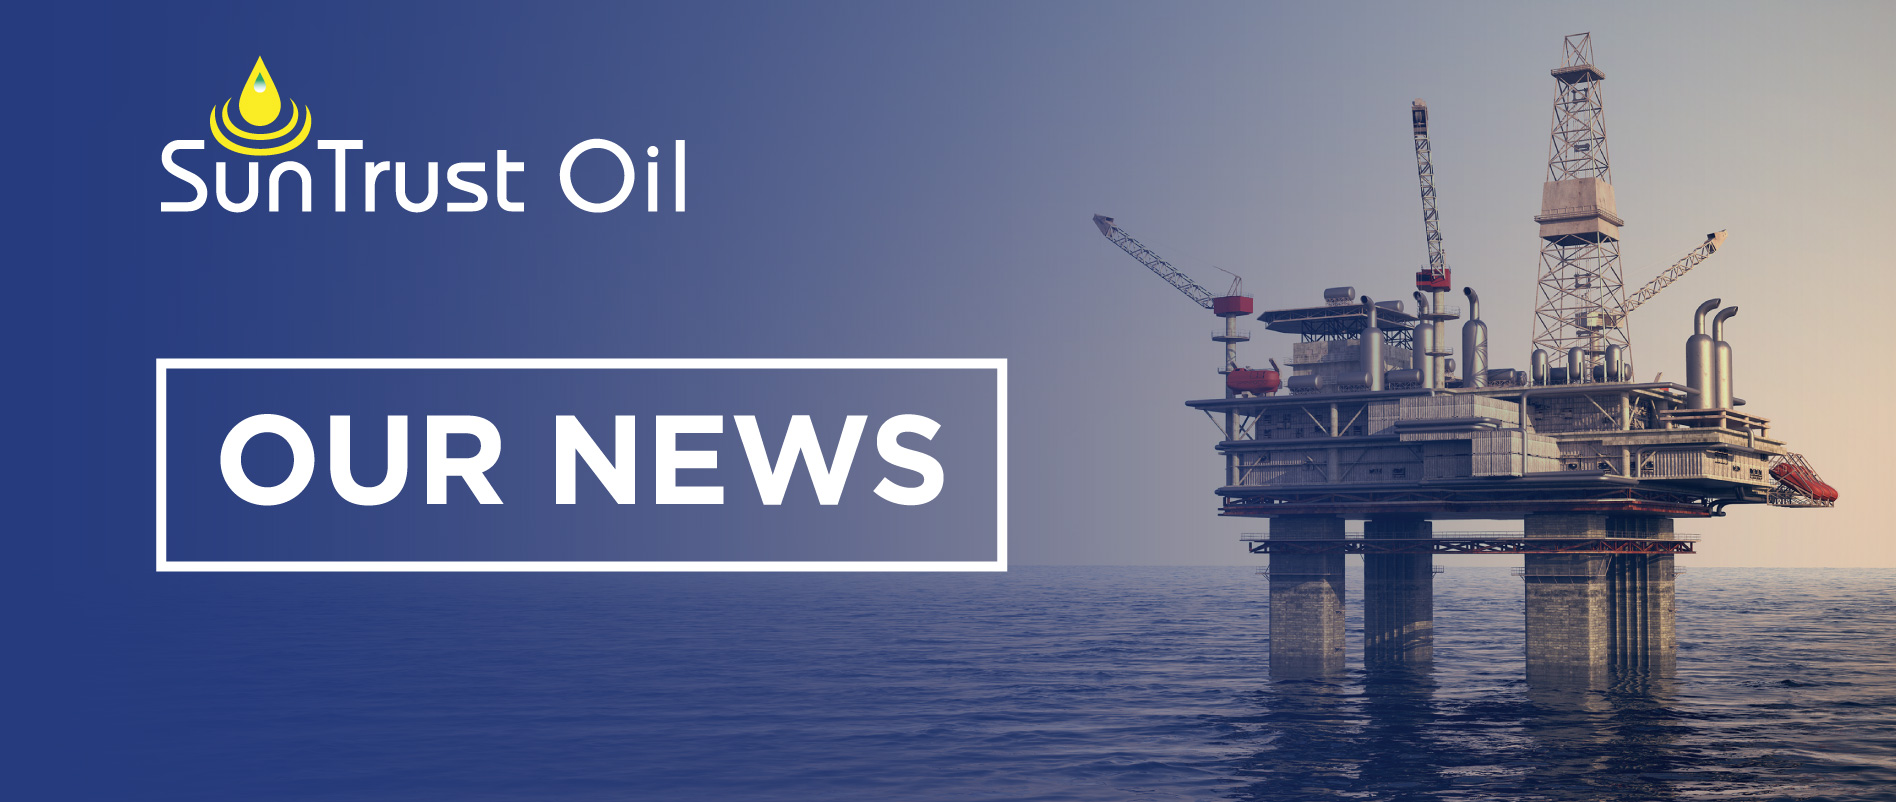 SUNTRUST OIL ANNOUNCES COMPLETION OF THE DRILLING PHASE OF ITS UMU-19 WELL CAMPAIGN